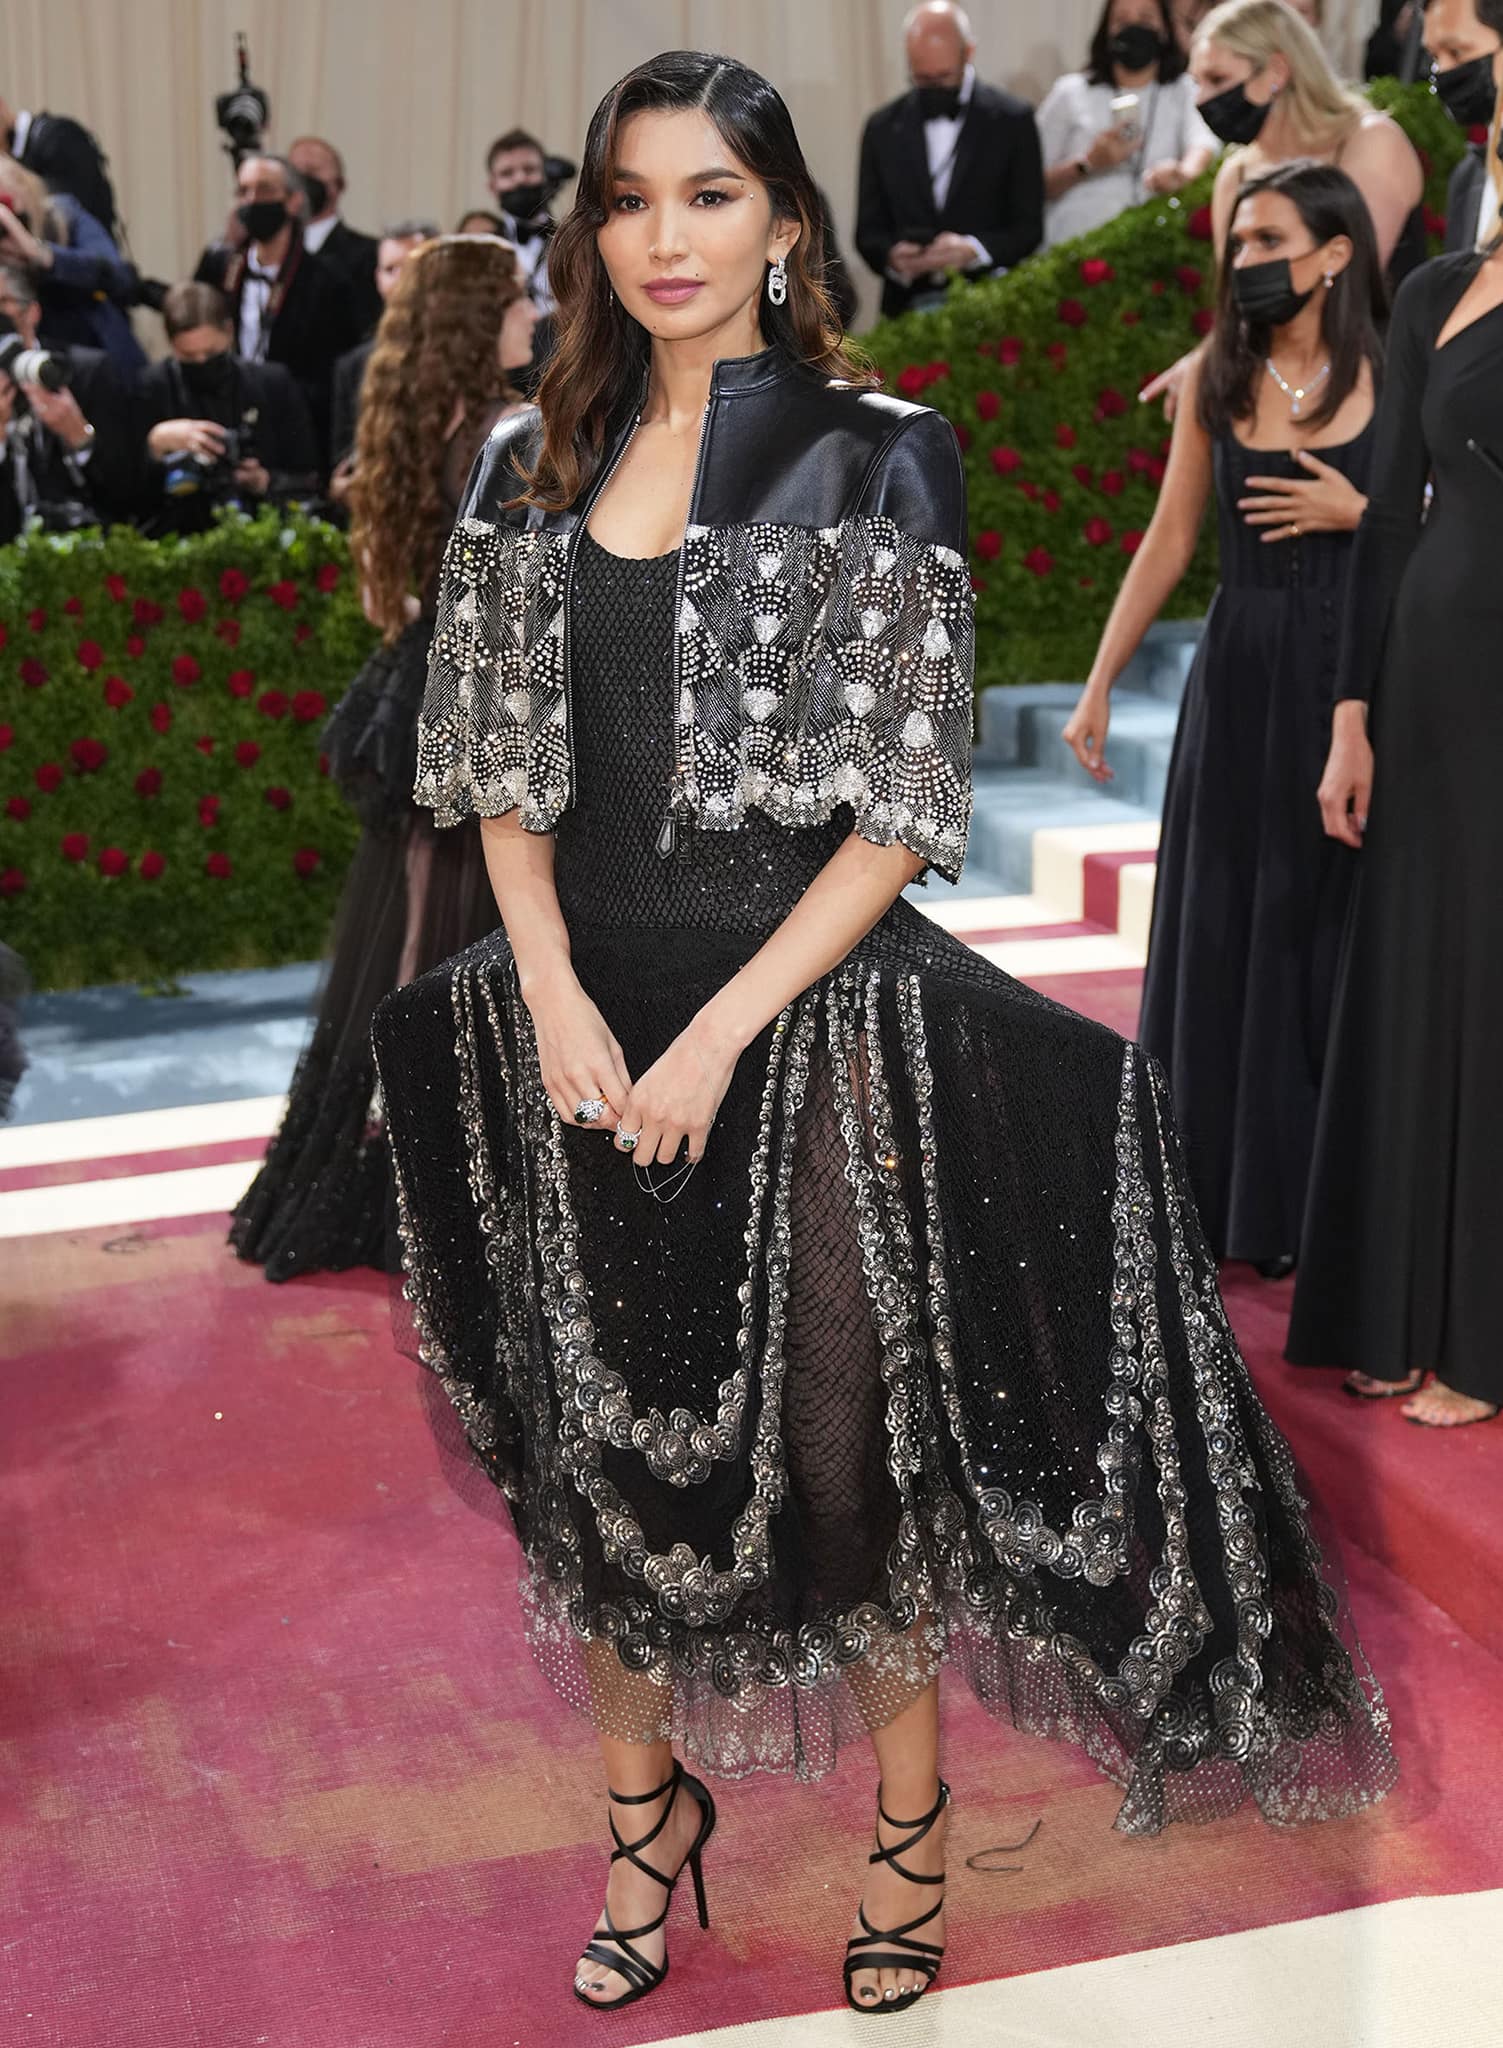 Gemma Chan pairs her crystal-embroidered gown with gladiator strappy heels